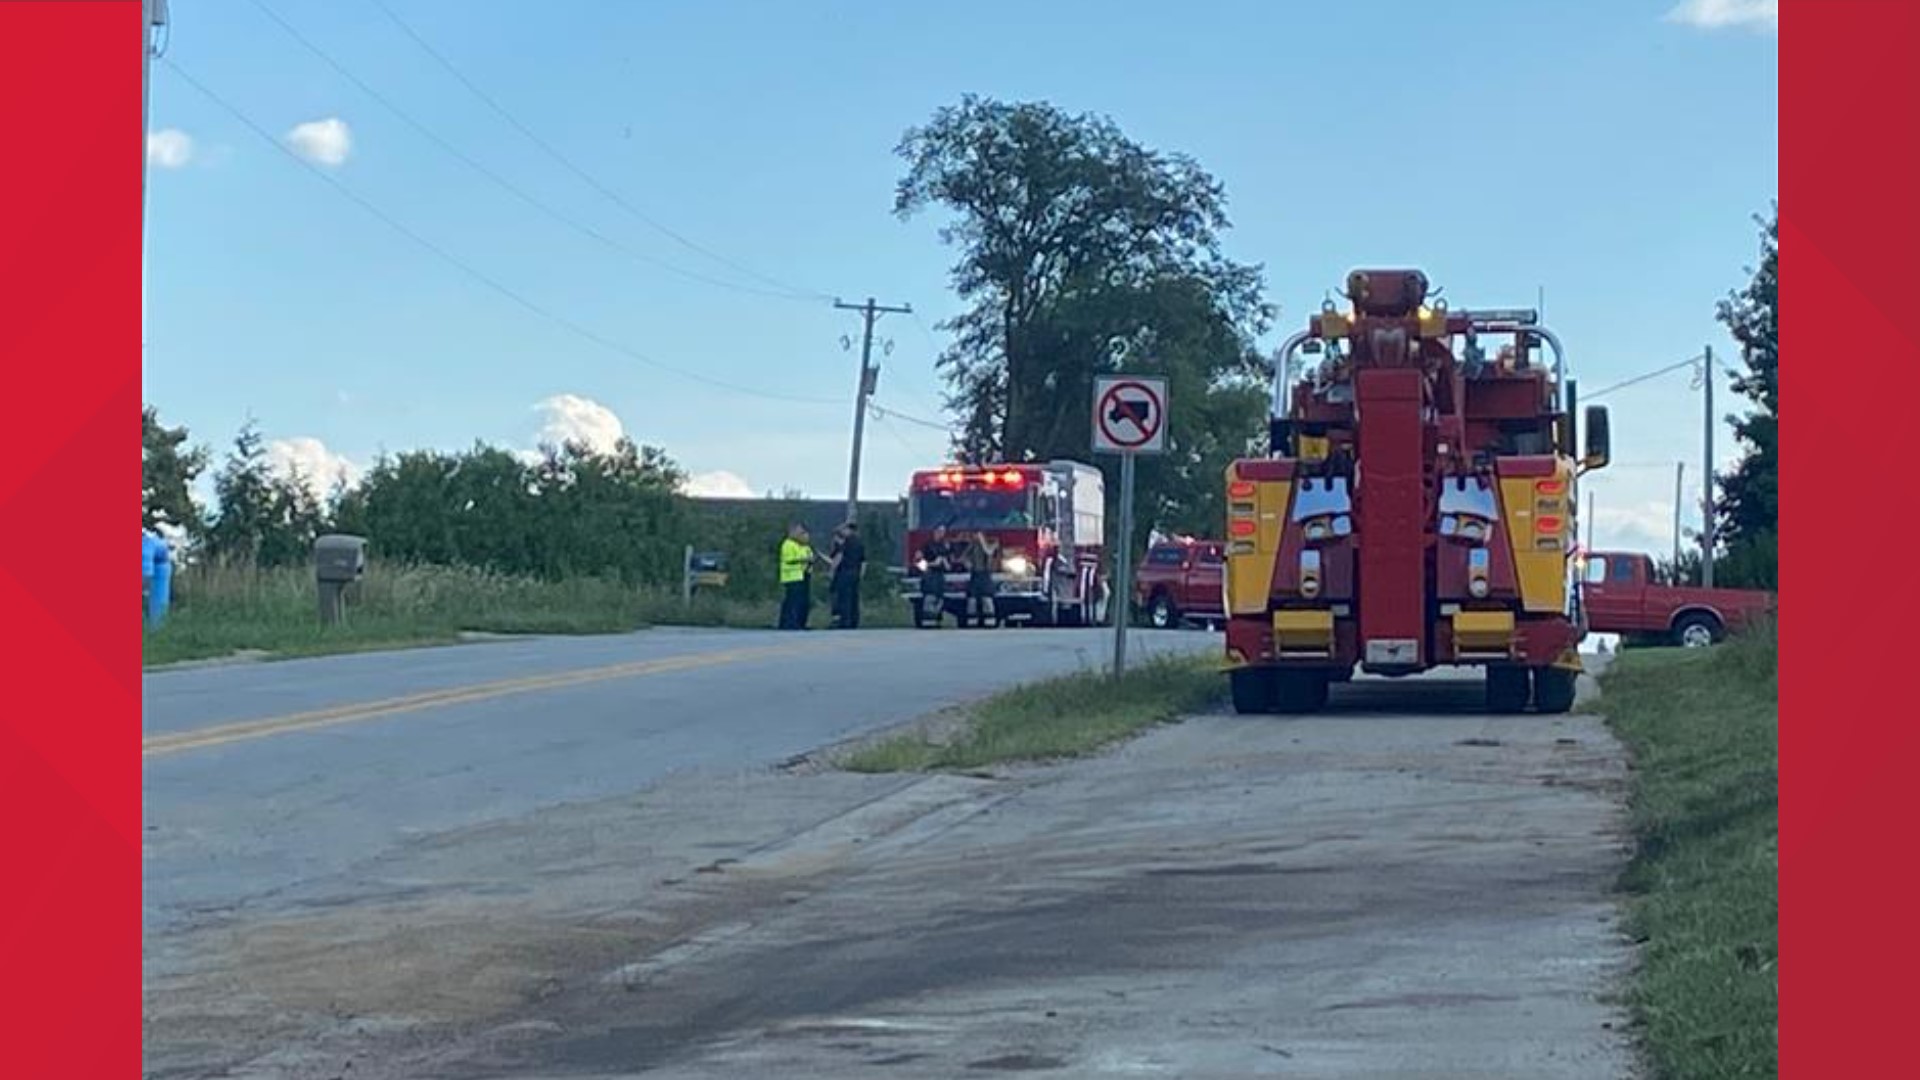 A crash that occurred in Ottawa County Thursday afternoon claimed the life of a teenager. The rest of the passengers were all under the age of 17.